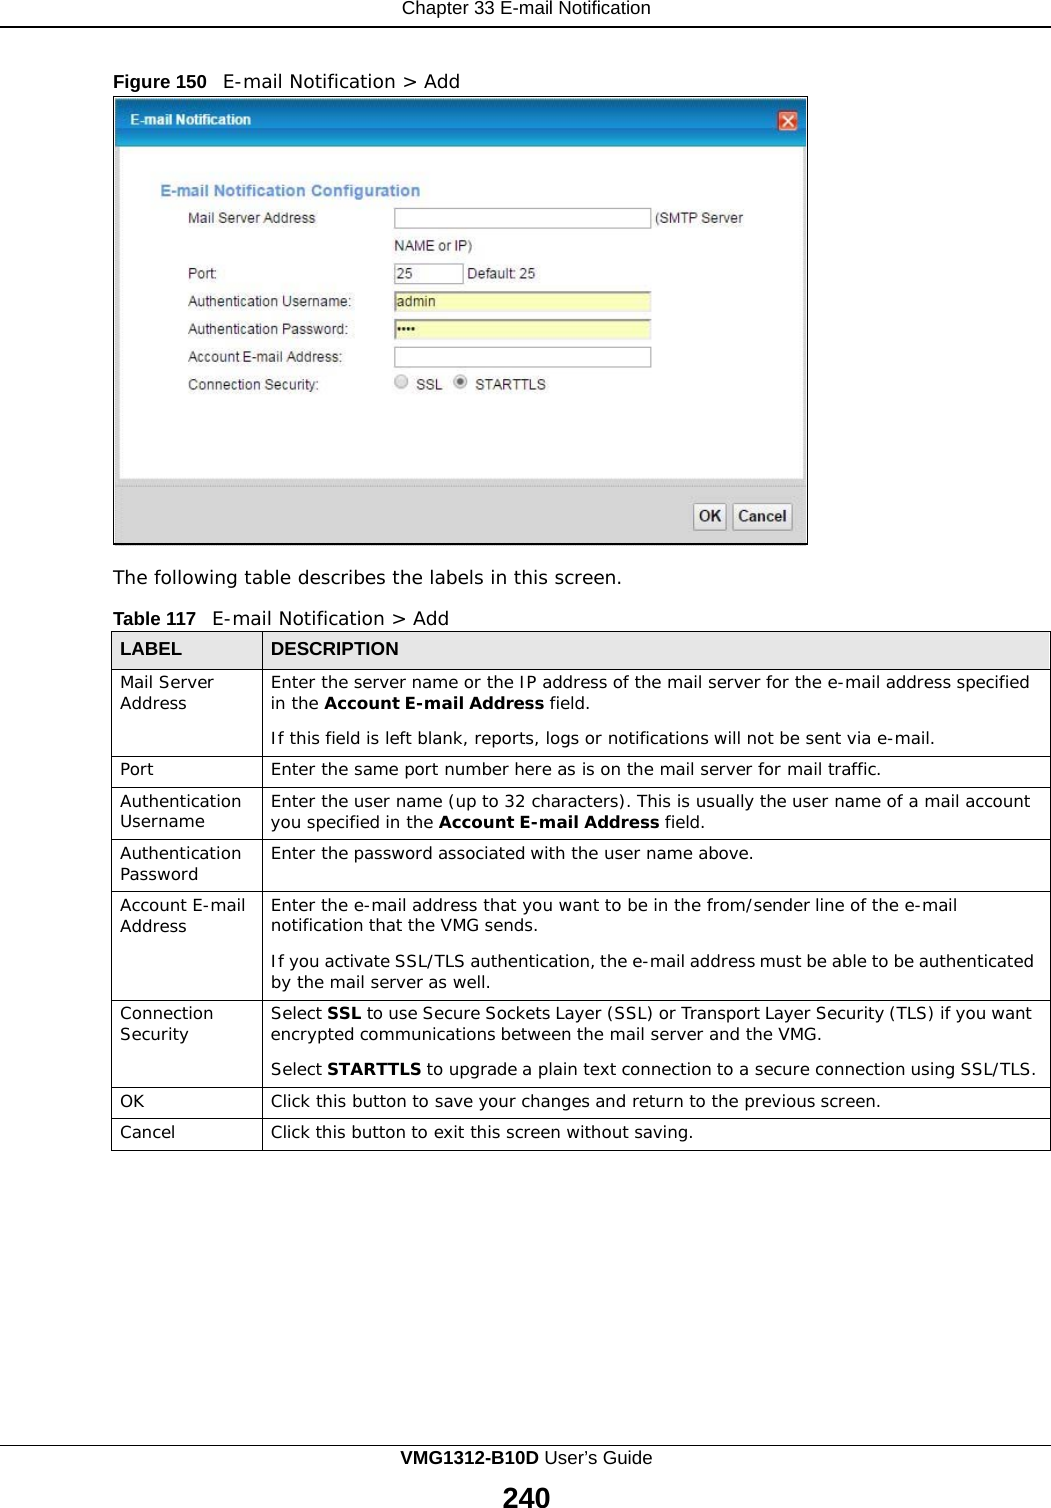    Chapter 33 E-mail Notification   Figure 150   E-mail Notification &gt; Add                        The following table describes the labels in this screen.  Table 117   E-mail Notification &gt; Add  LABEL DESCRIPTION Mail Server Address Enter the server name or the IP address of the mail server for the e-mail address specified in the Account E-mail Address field.  If this field is left blank, reports, logs or notifications will not be sent via e-mail. Port Enter the same port number here as is on the mail server for mail traffic. Authentication Username Enter the user name (up to 32 characters). This is usually the user name of a mail account you specified in the Account E-mail Address field. Authentication Password Enter the password associated with the user name above. Account E-mail Address Enter the e-mail address that you want to be in the from/sender line of the e-mail notification that the VMG sends.  If you activate SSL/TLS authentication, the e-mail address must be able to be authenticated by the mail server as well. Connection Security Select SSL to use Secure Sockets Layer (SSL) or Transport Layer Security (TLS) if you want encrypted communications between the mail server and the VMG.  Select STARTTLS to upgrade a plain text connection to a secure connection using SSL/TLS. OK Click this button to save your changes and return to the previous screen. Cancel Click this button to exit this screen without saving. VMG1312-B10D User’s Guide  240  